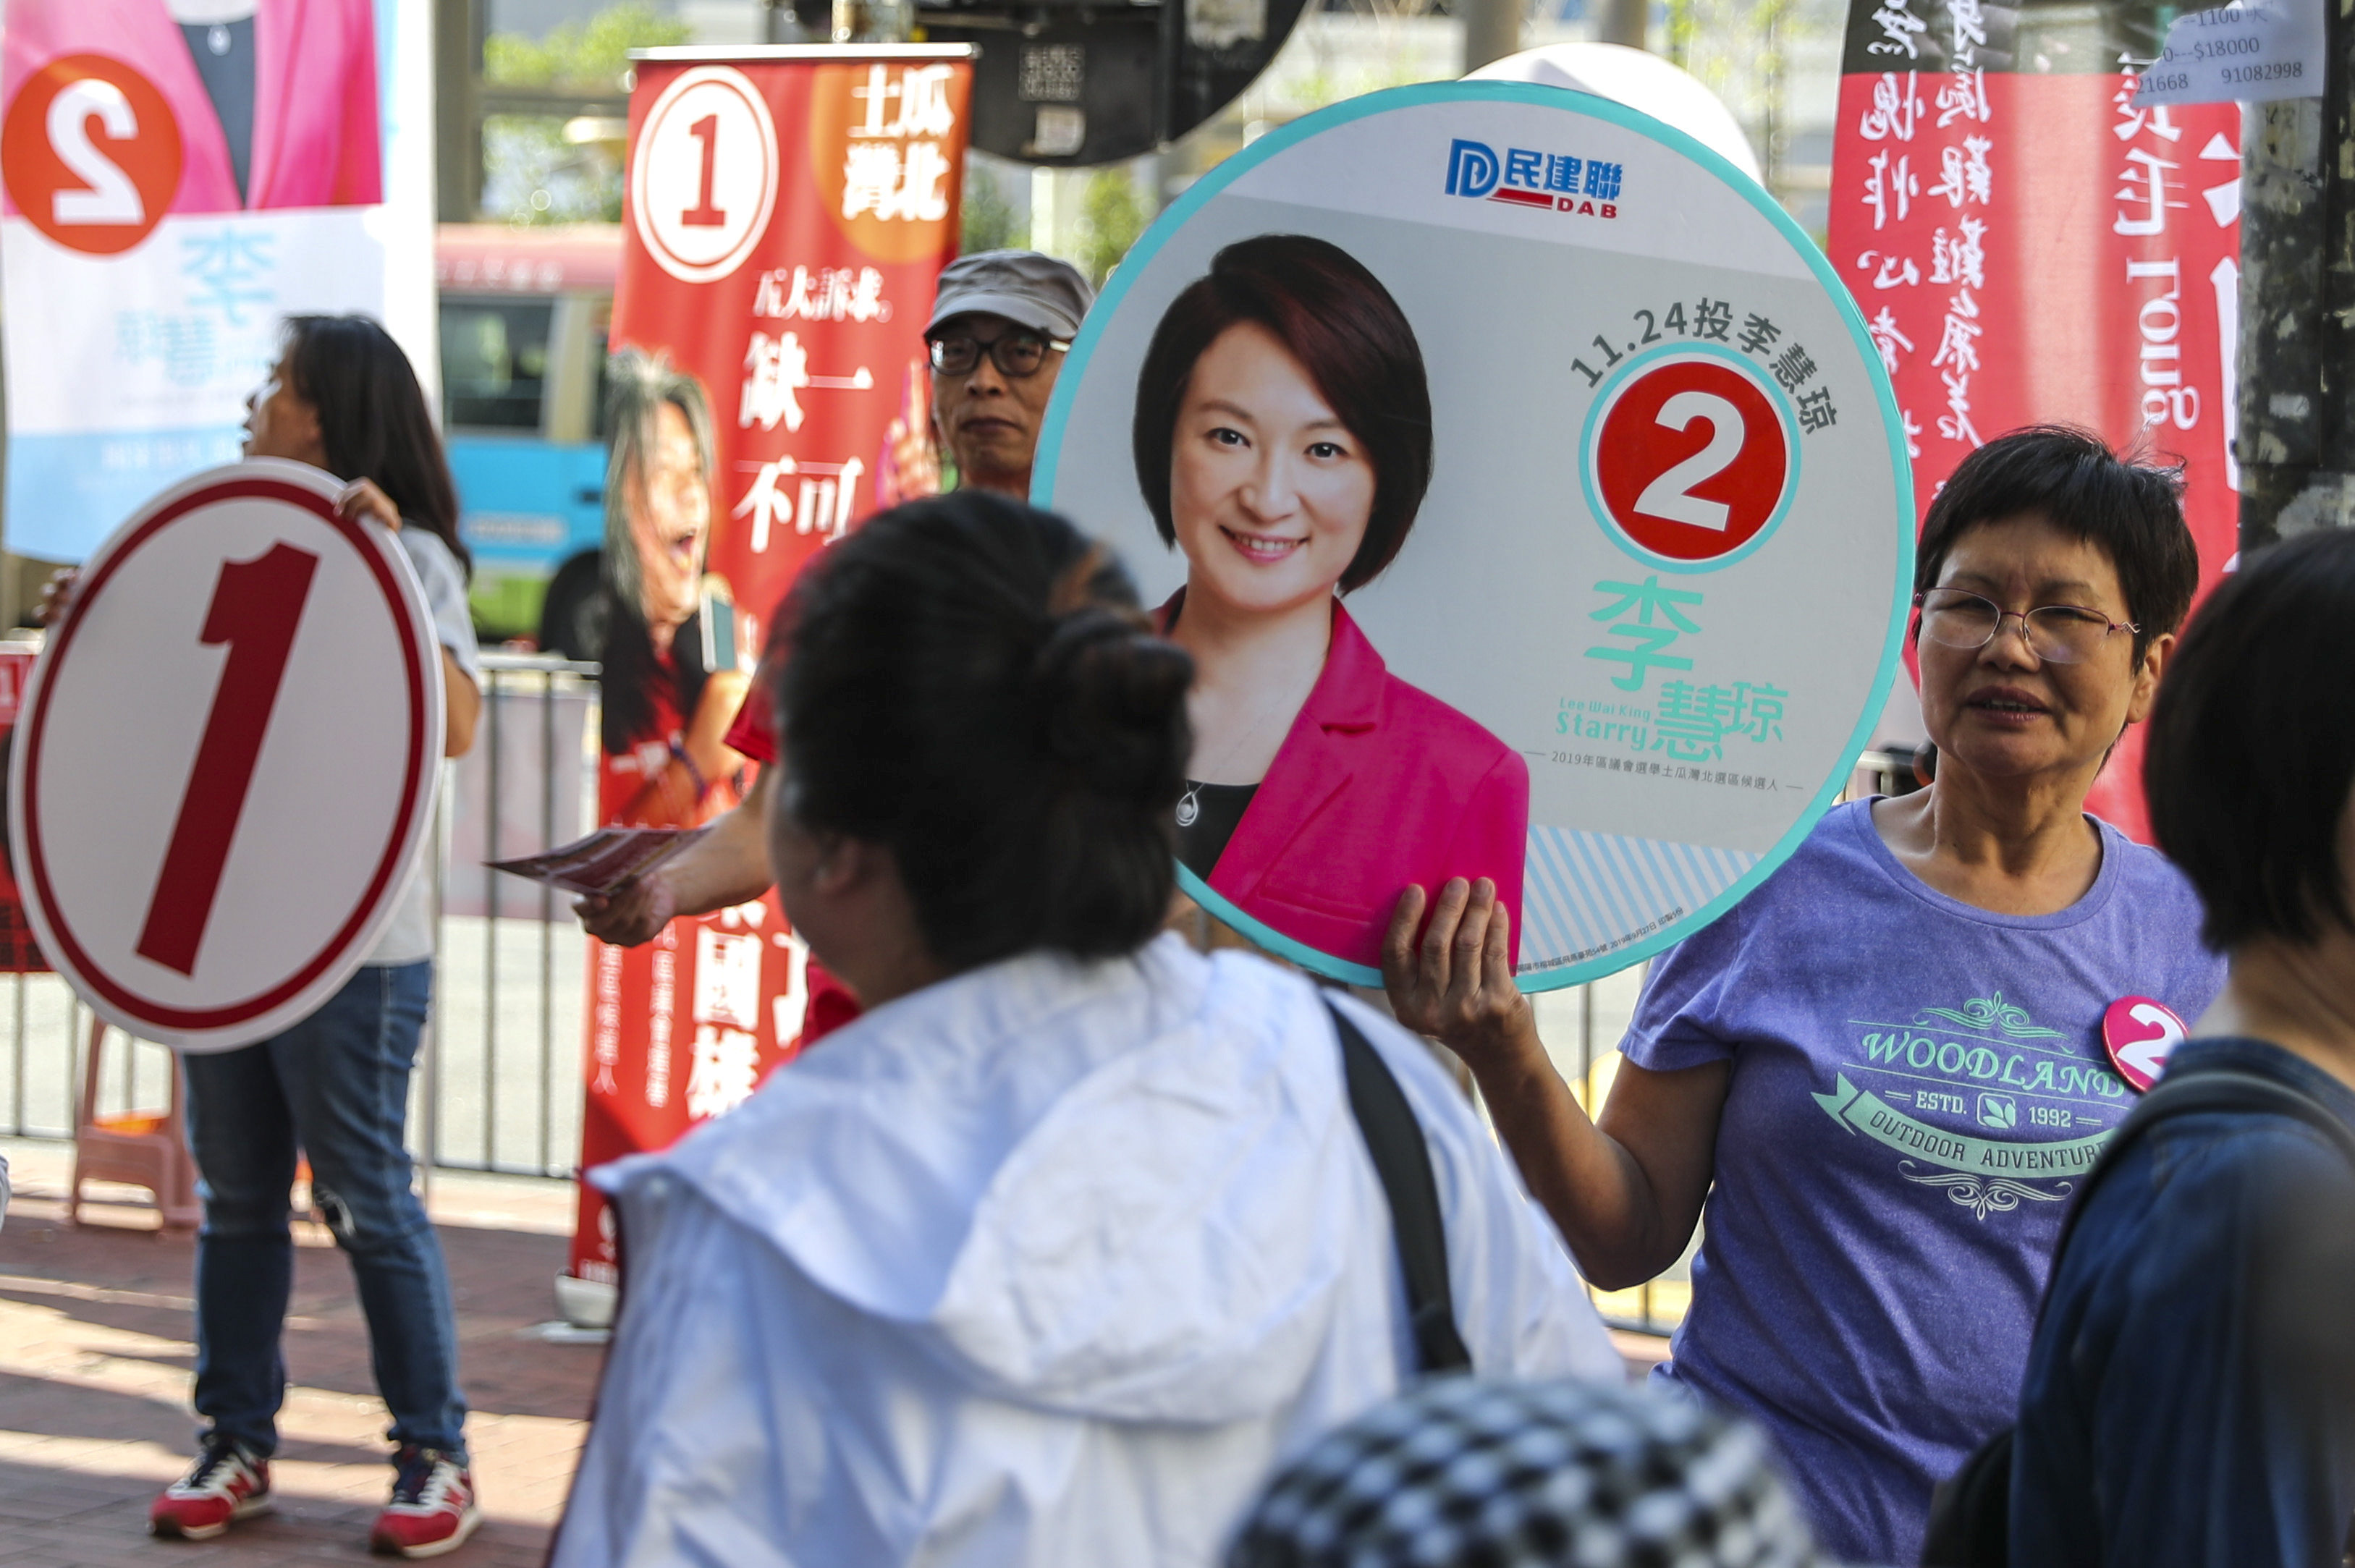 Voters appear for the district council election at polling stations at ELCHK Hung Hom Lutheran Primary School, To Kwa Wan on November 24, 2019. Photo: Sam Tsang